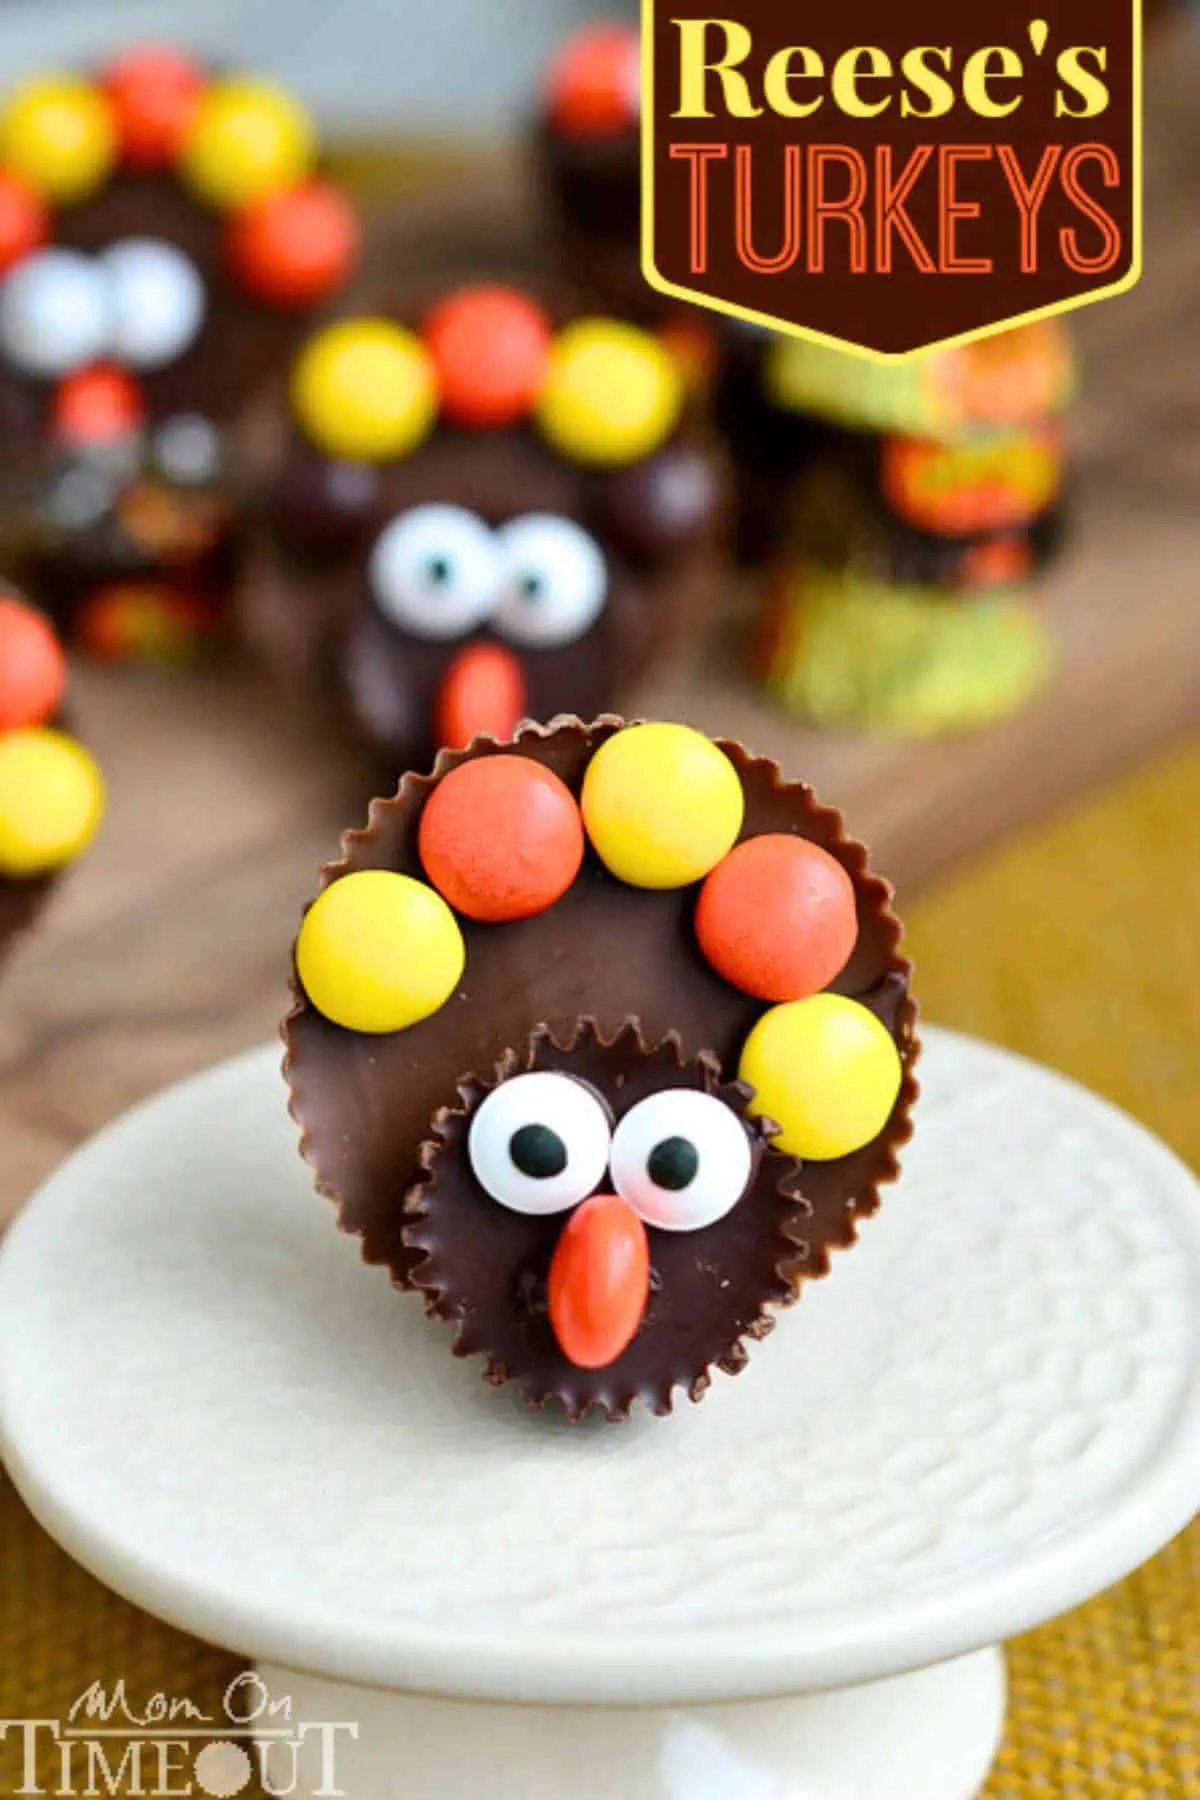 Peanut butter cup turkeys as an easy fall treat or snack idea. Would be great for thanksgiving treat as well